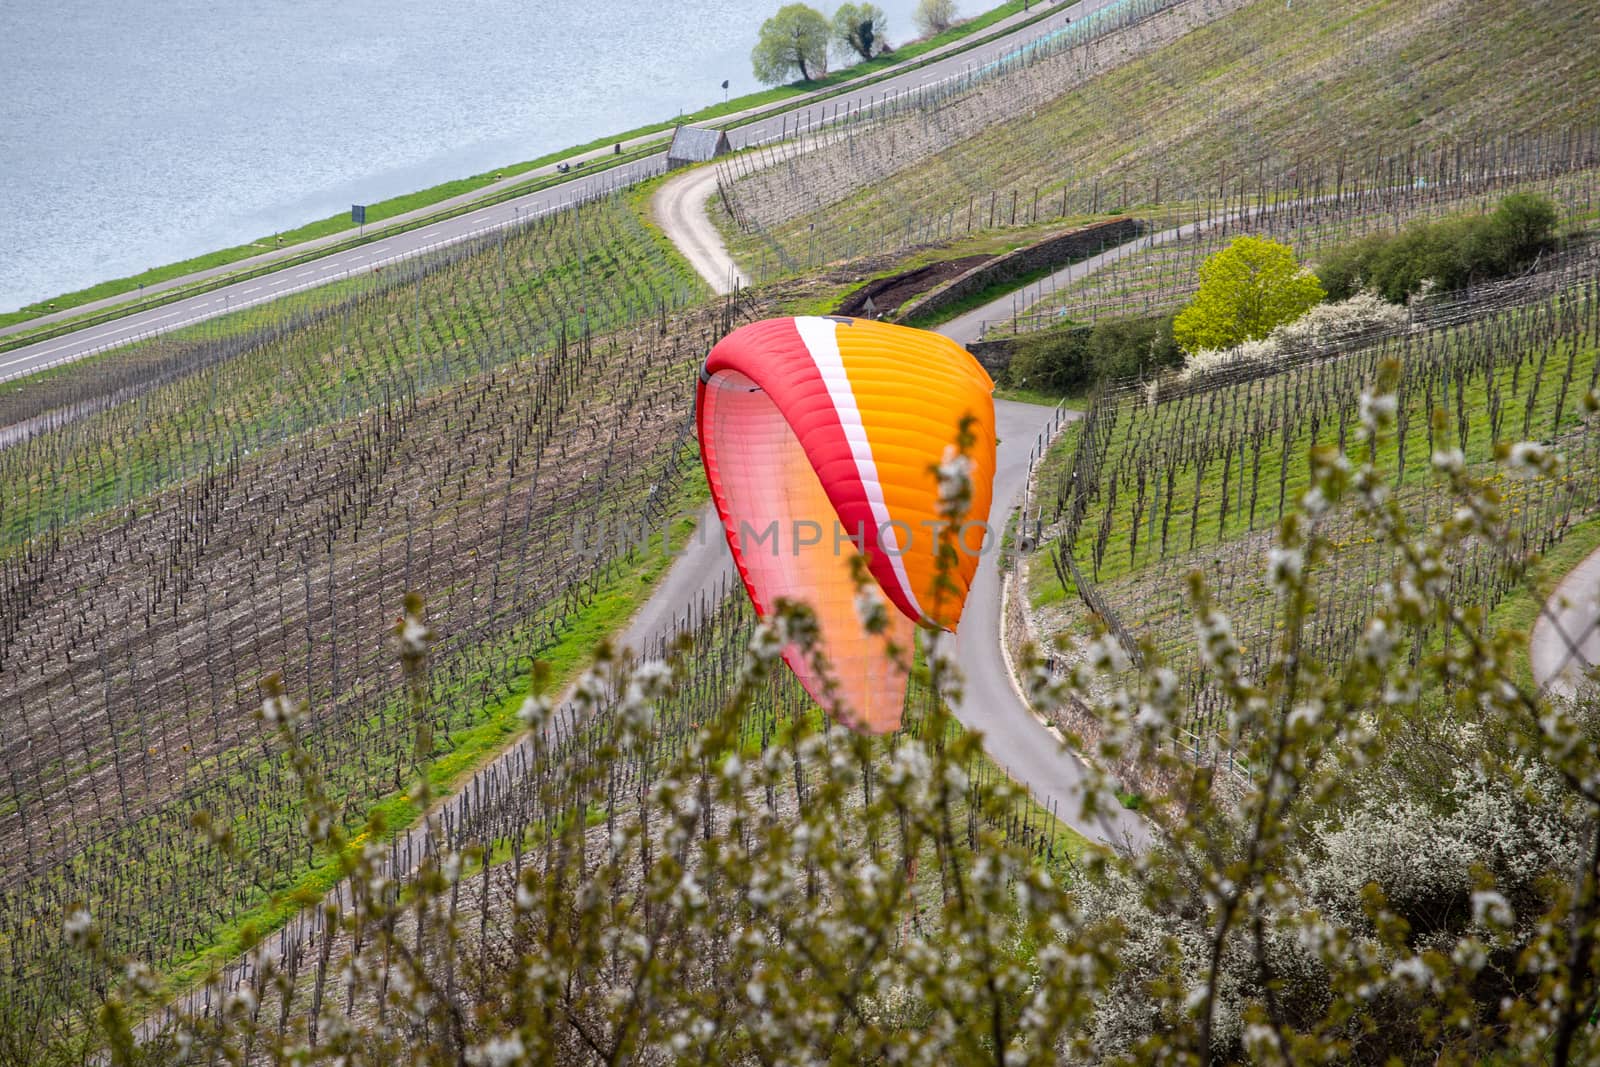 Paraglider over river Moselle, Germany by reinerc